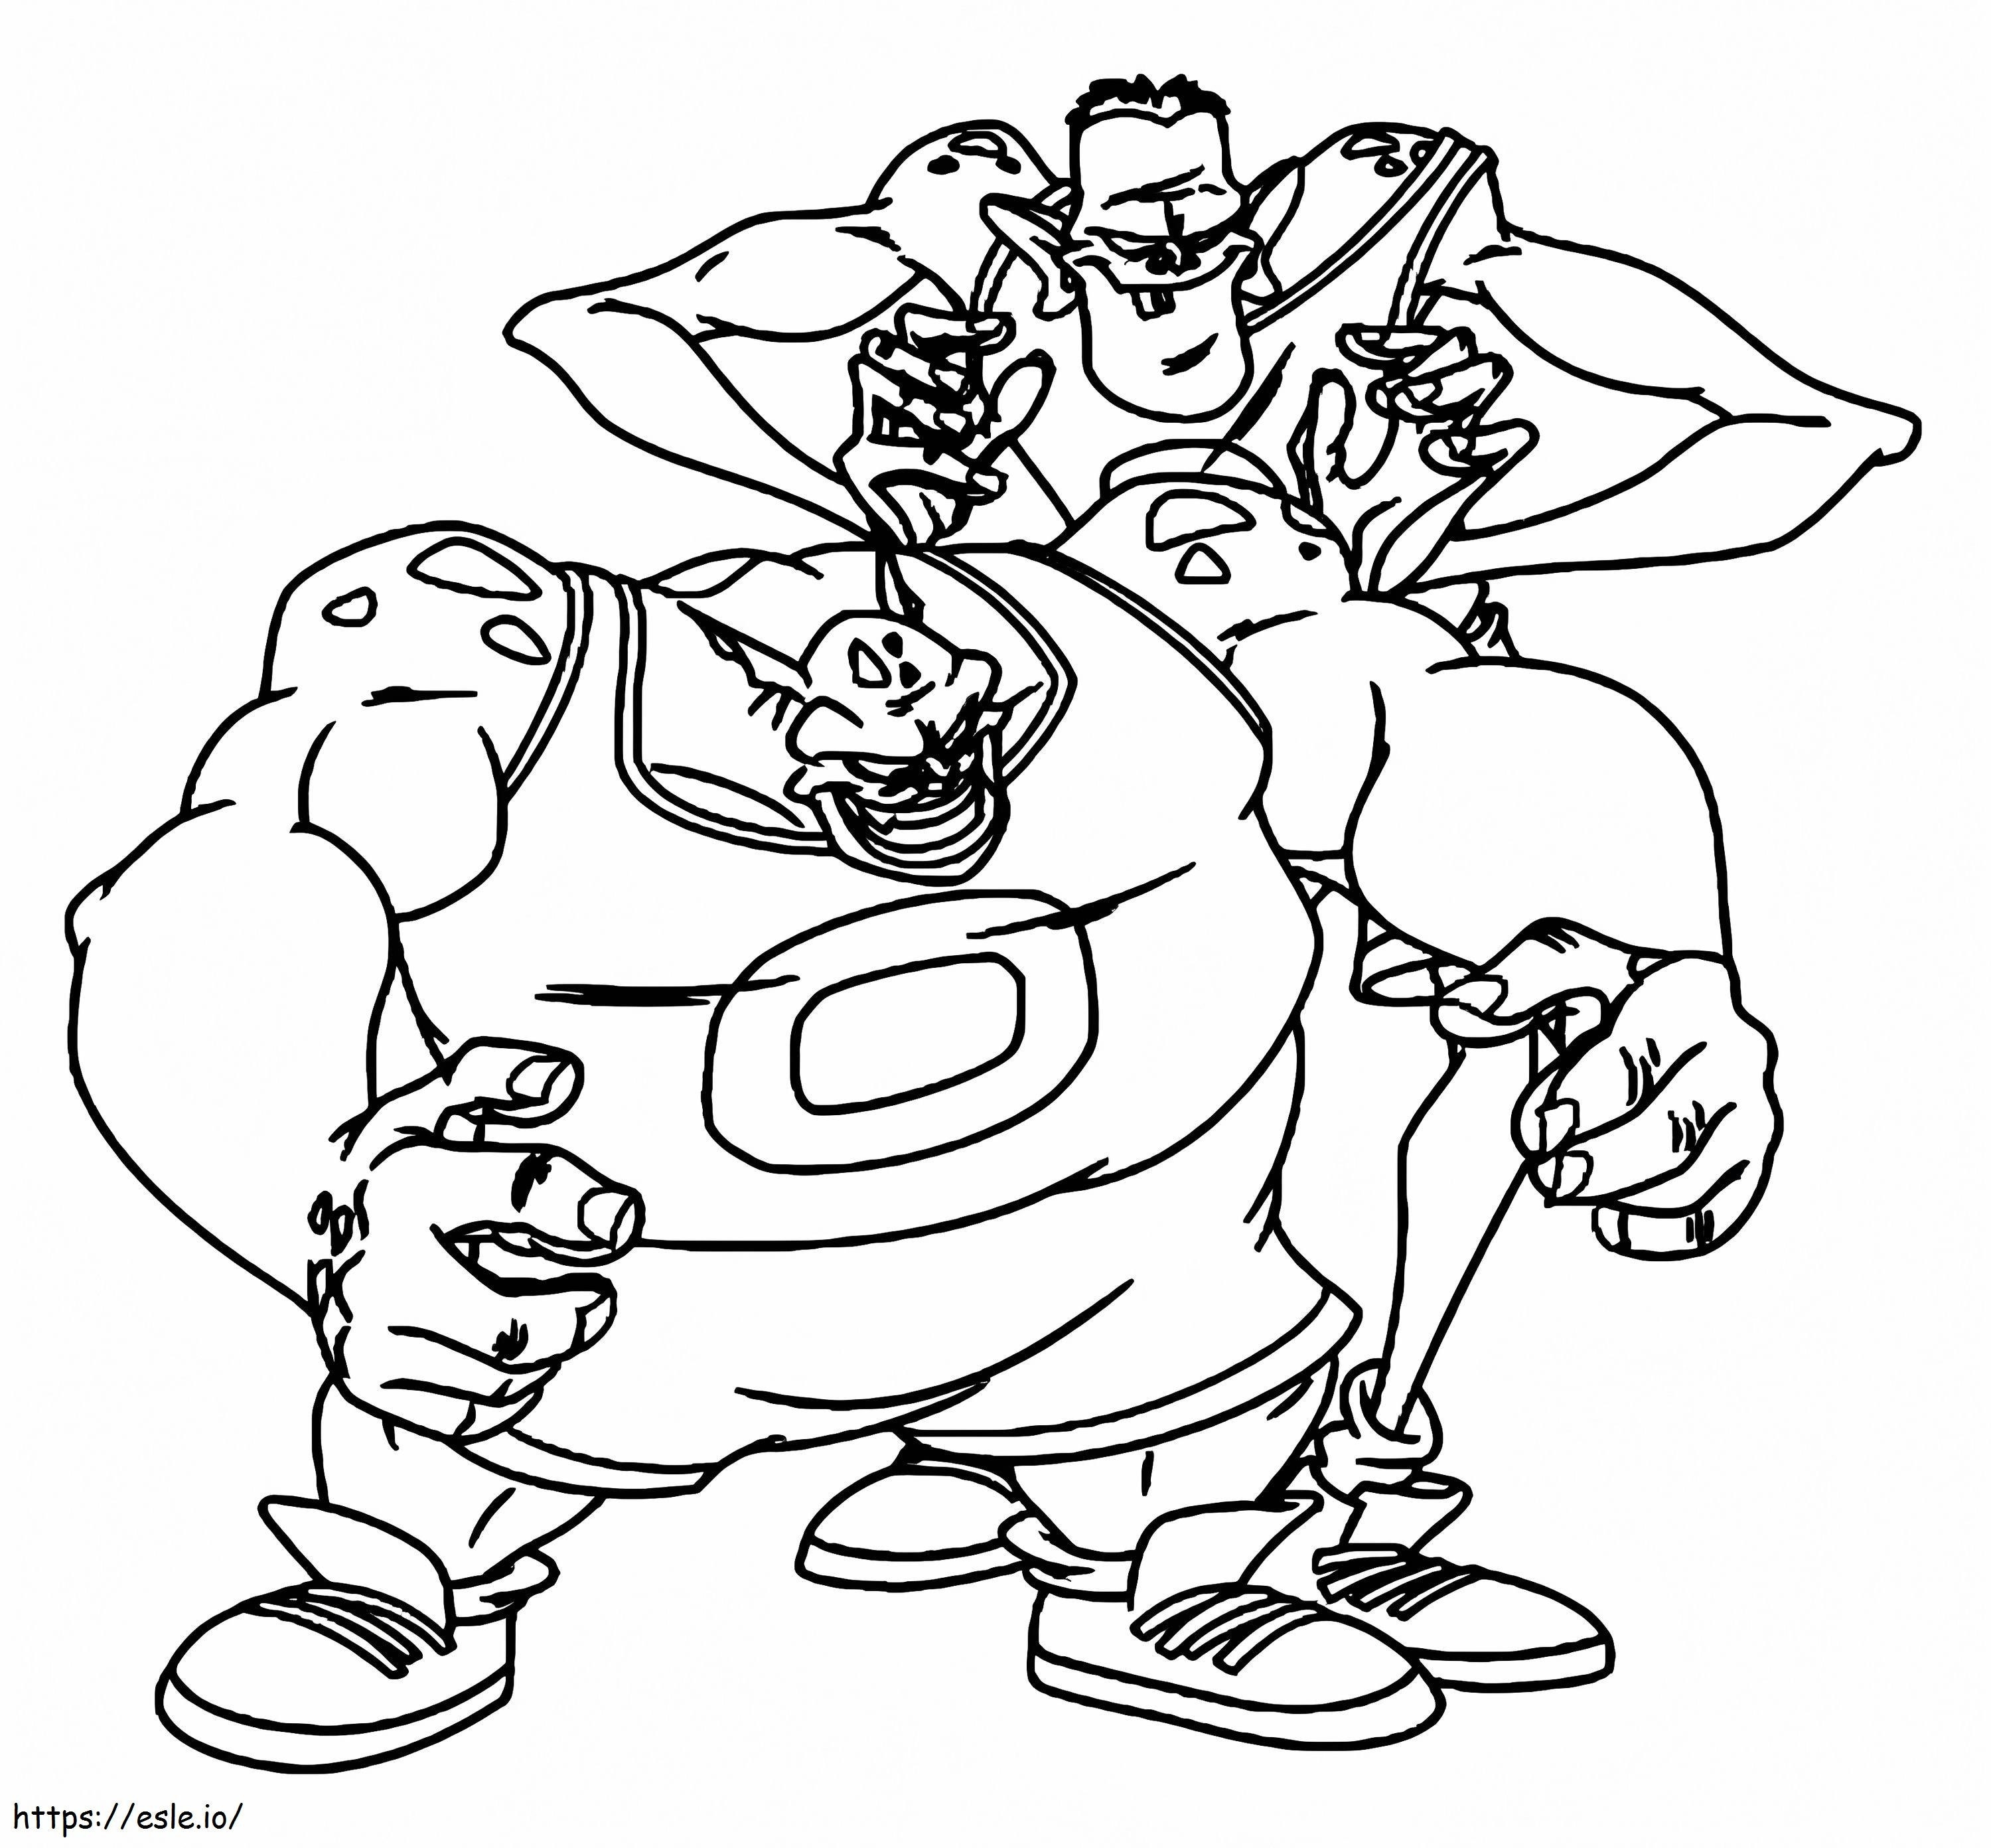 Monsters In Space Jam coloring page